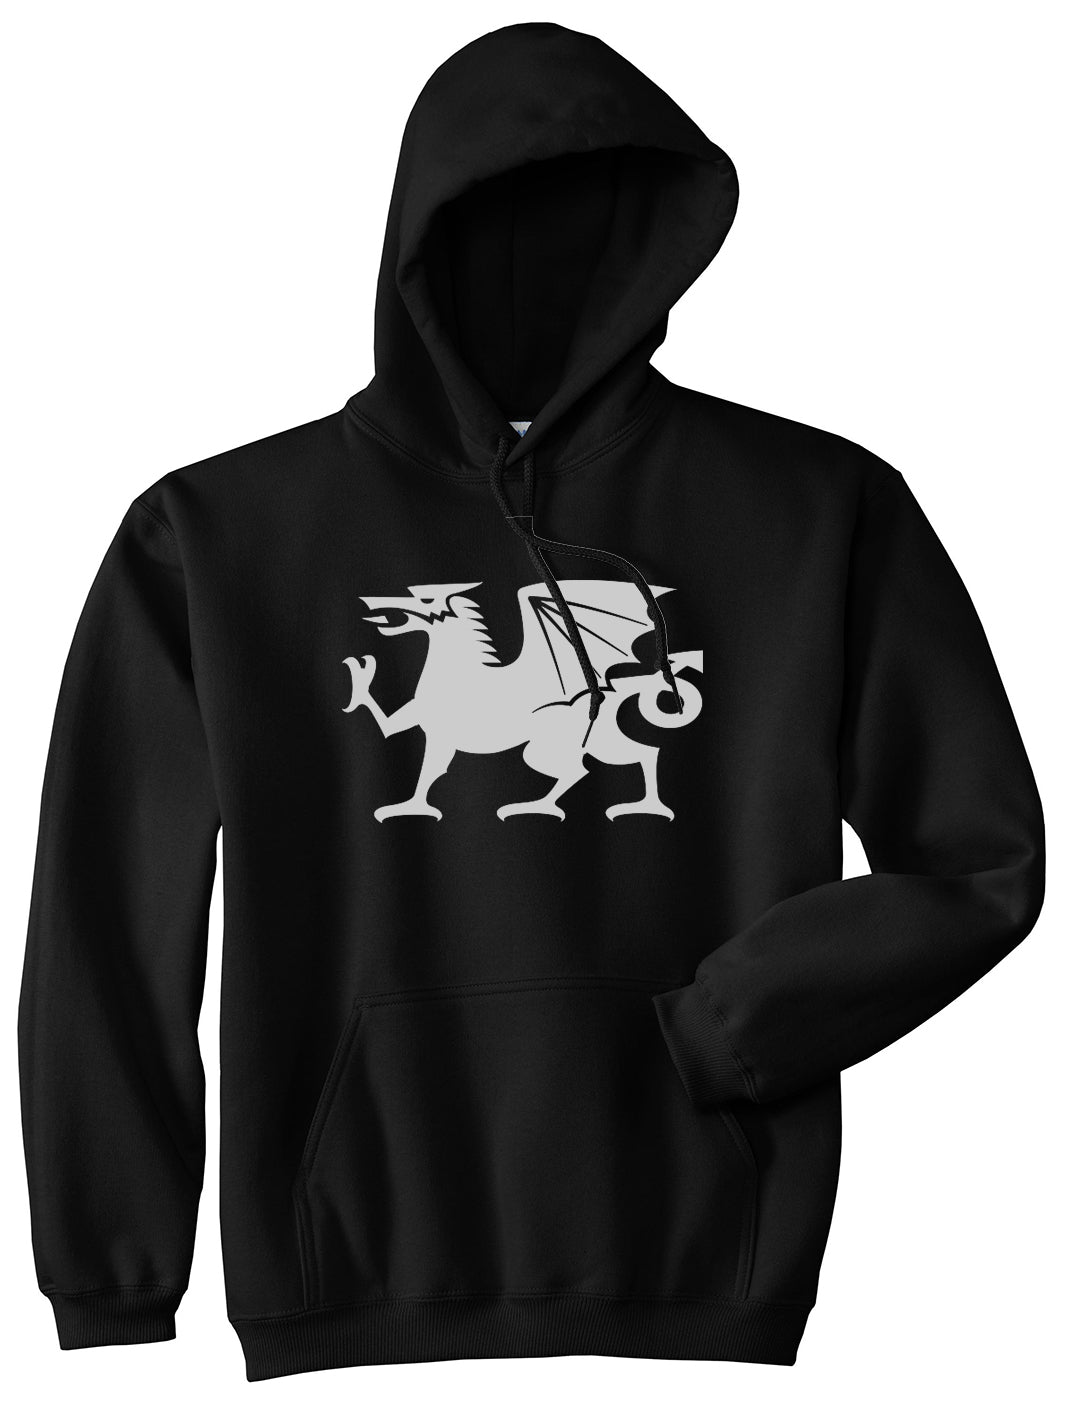 Wales Flag Dragon Symbol Black Pullover Hoodie by Kings Of NY